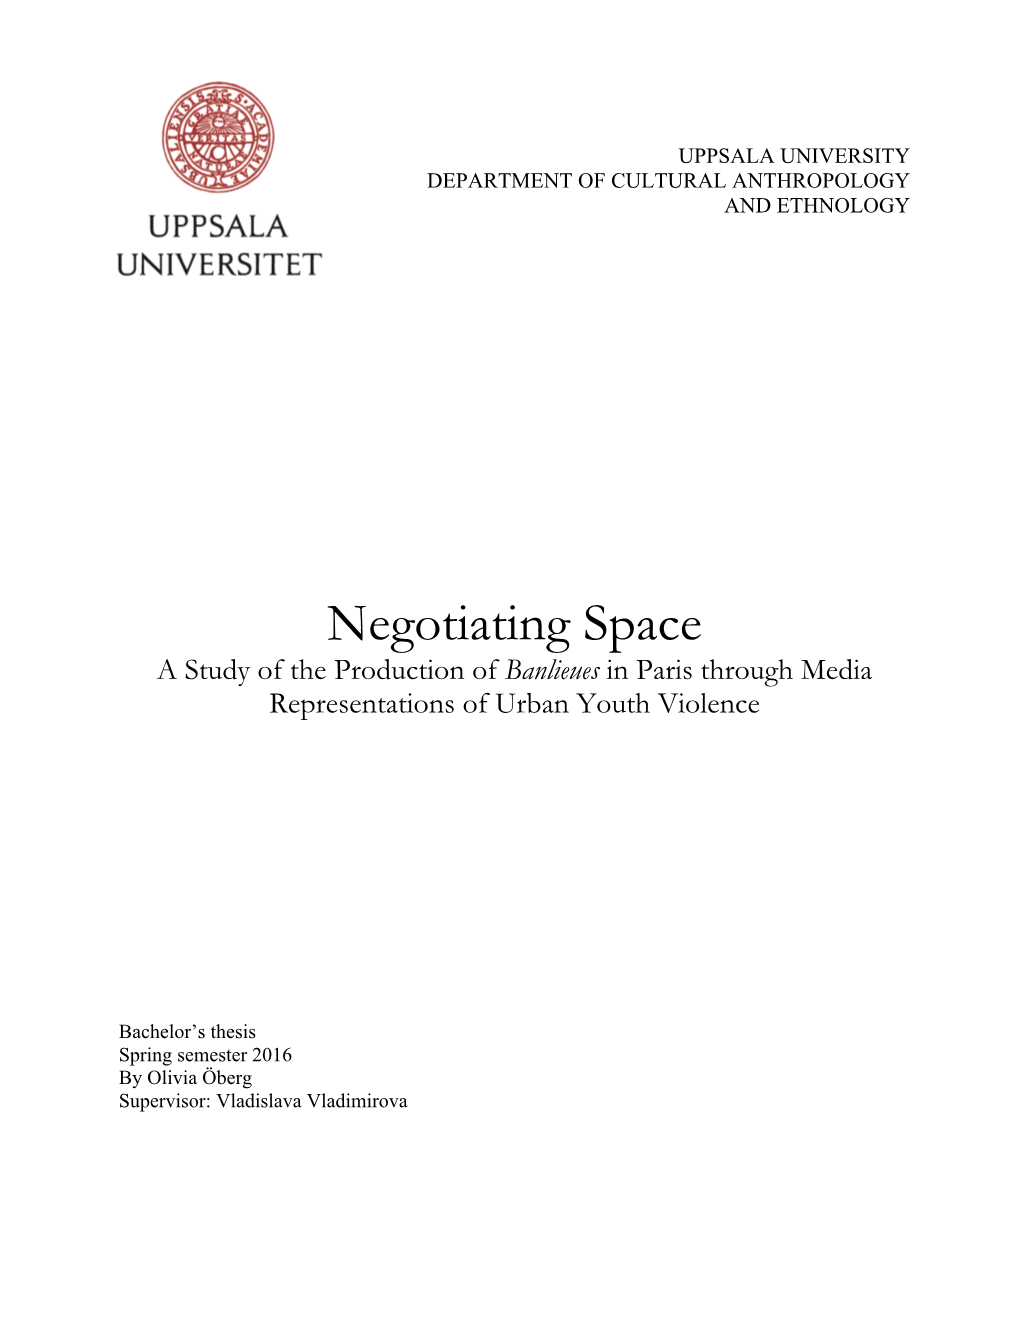 Negotiating Space a Study of the Production of Banlieues in Paris Through Media Representations of Urban Youth Violence